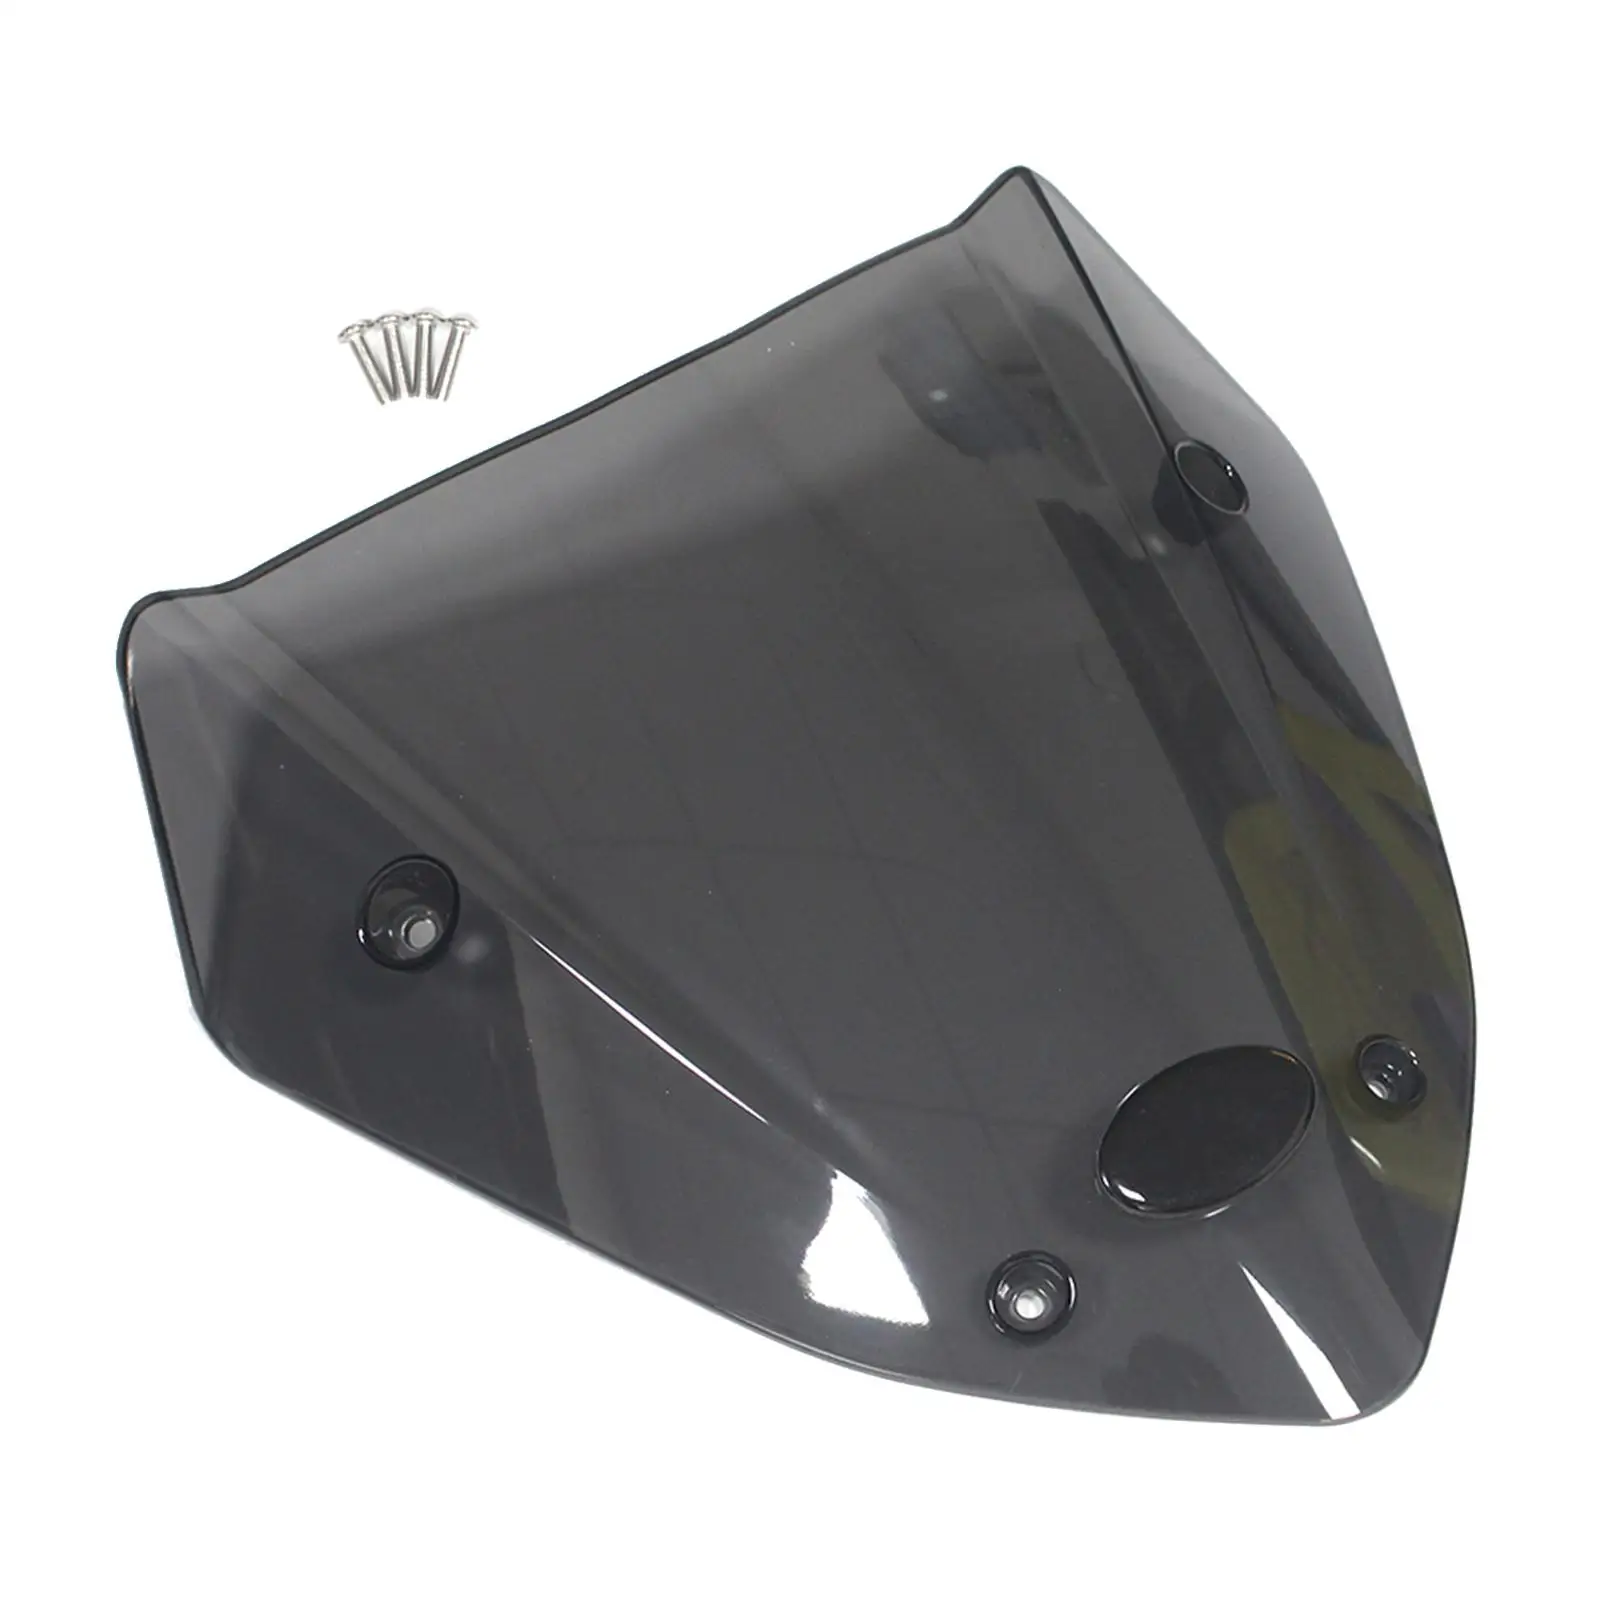 Motorbike Motorcycle Windshield Wind Deflector for Yamaha Xmax 300 250 125 Windproof Replacement Accessories Premium